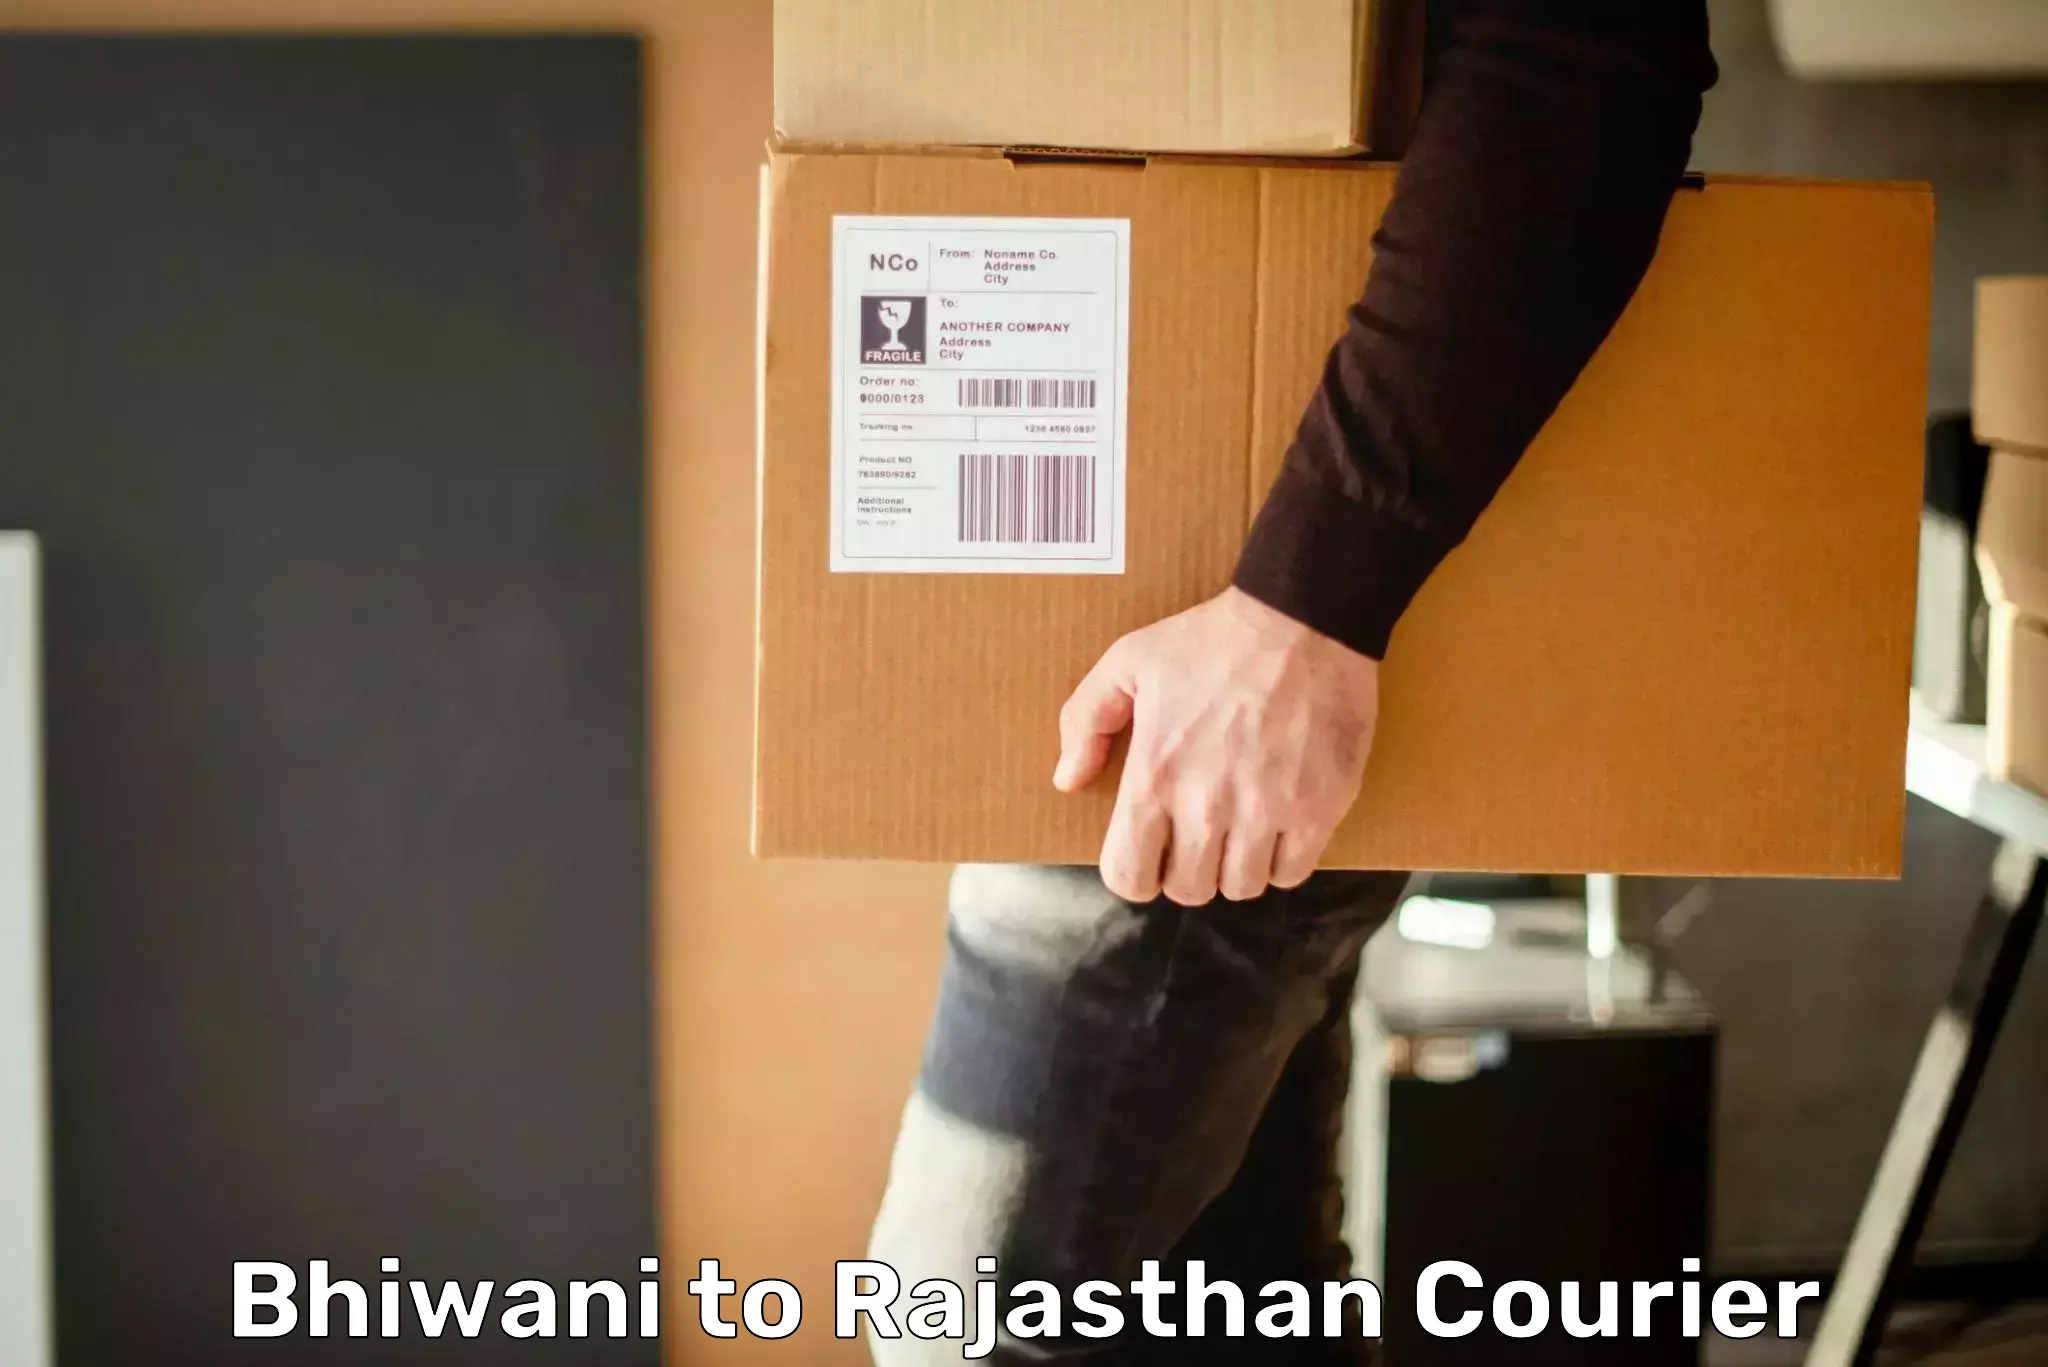 Global courier networks Bhiwani to Asind